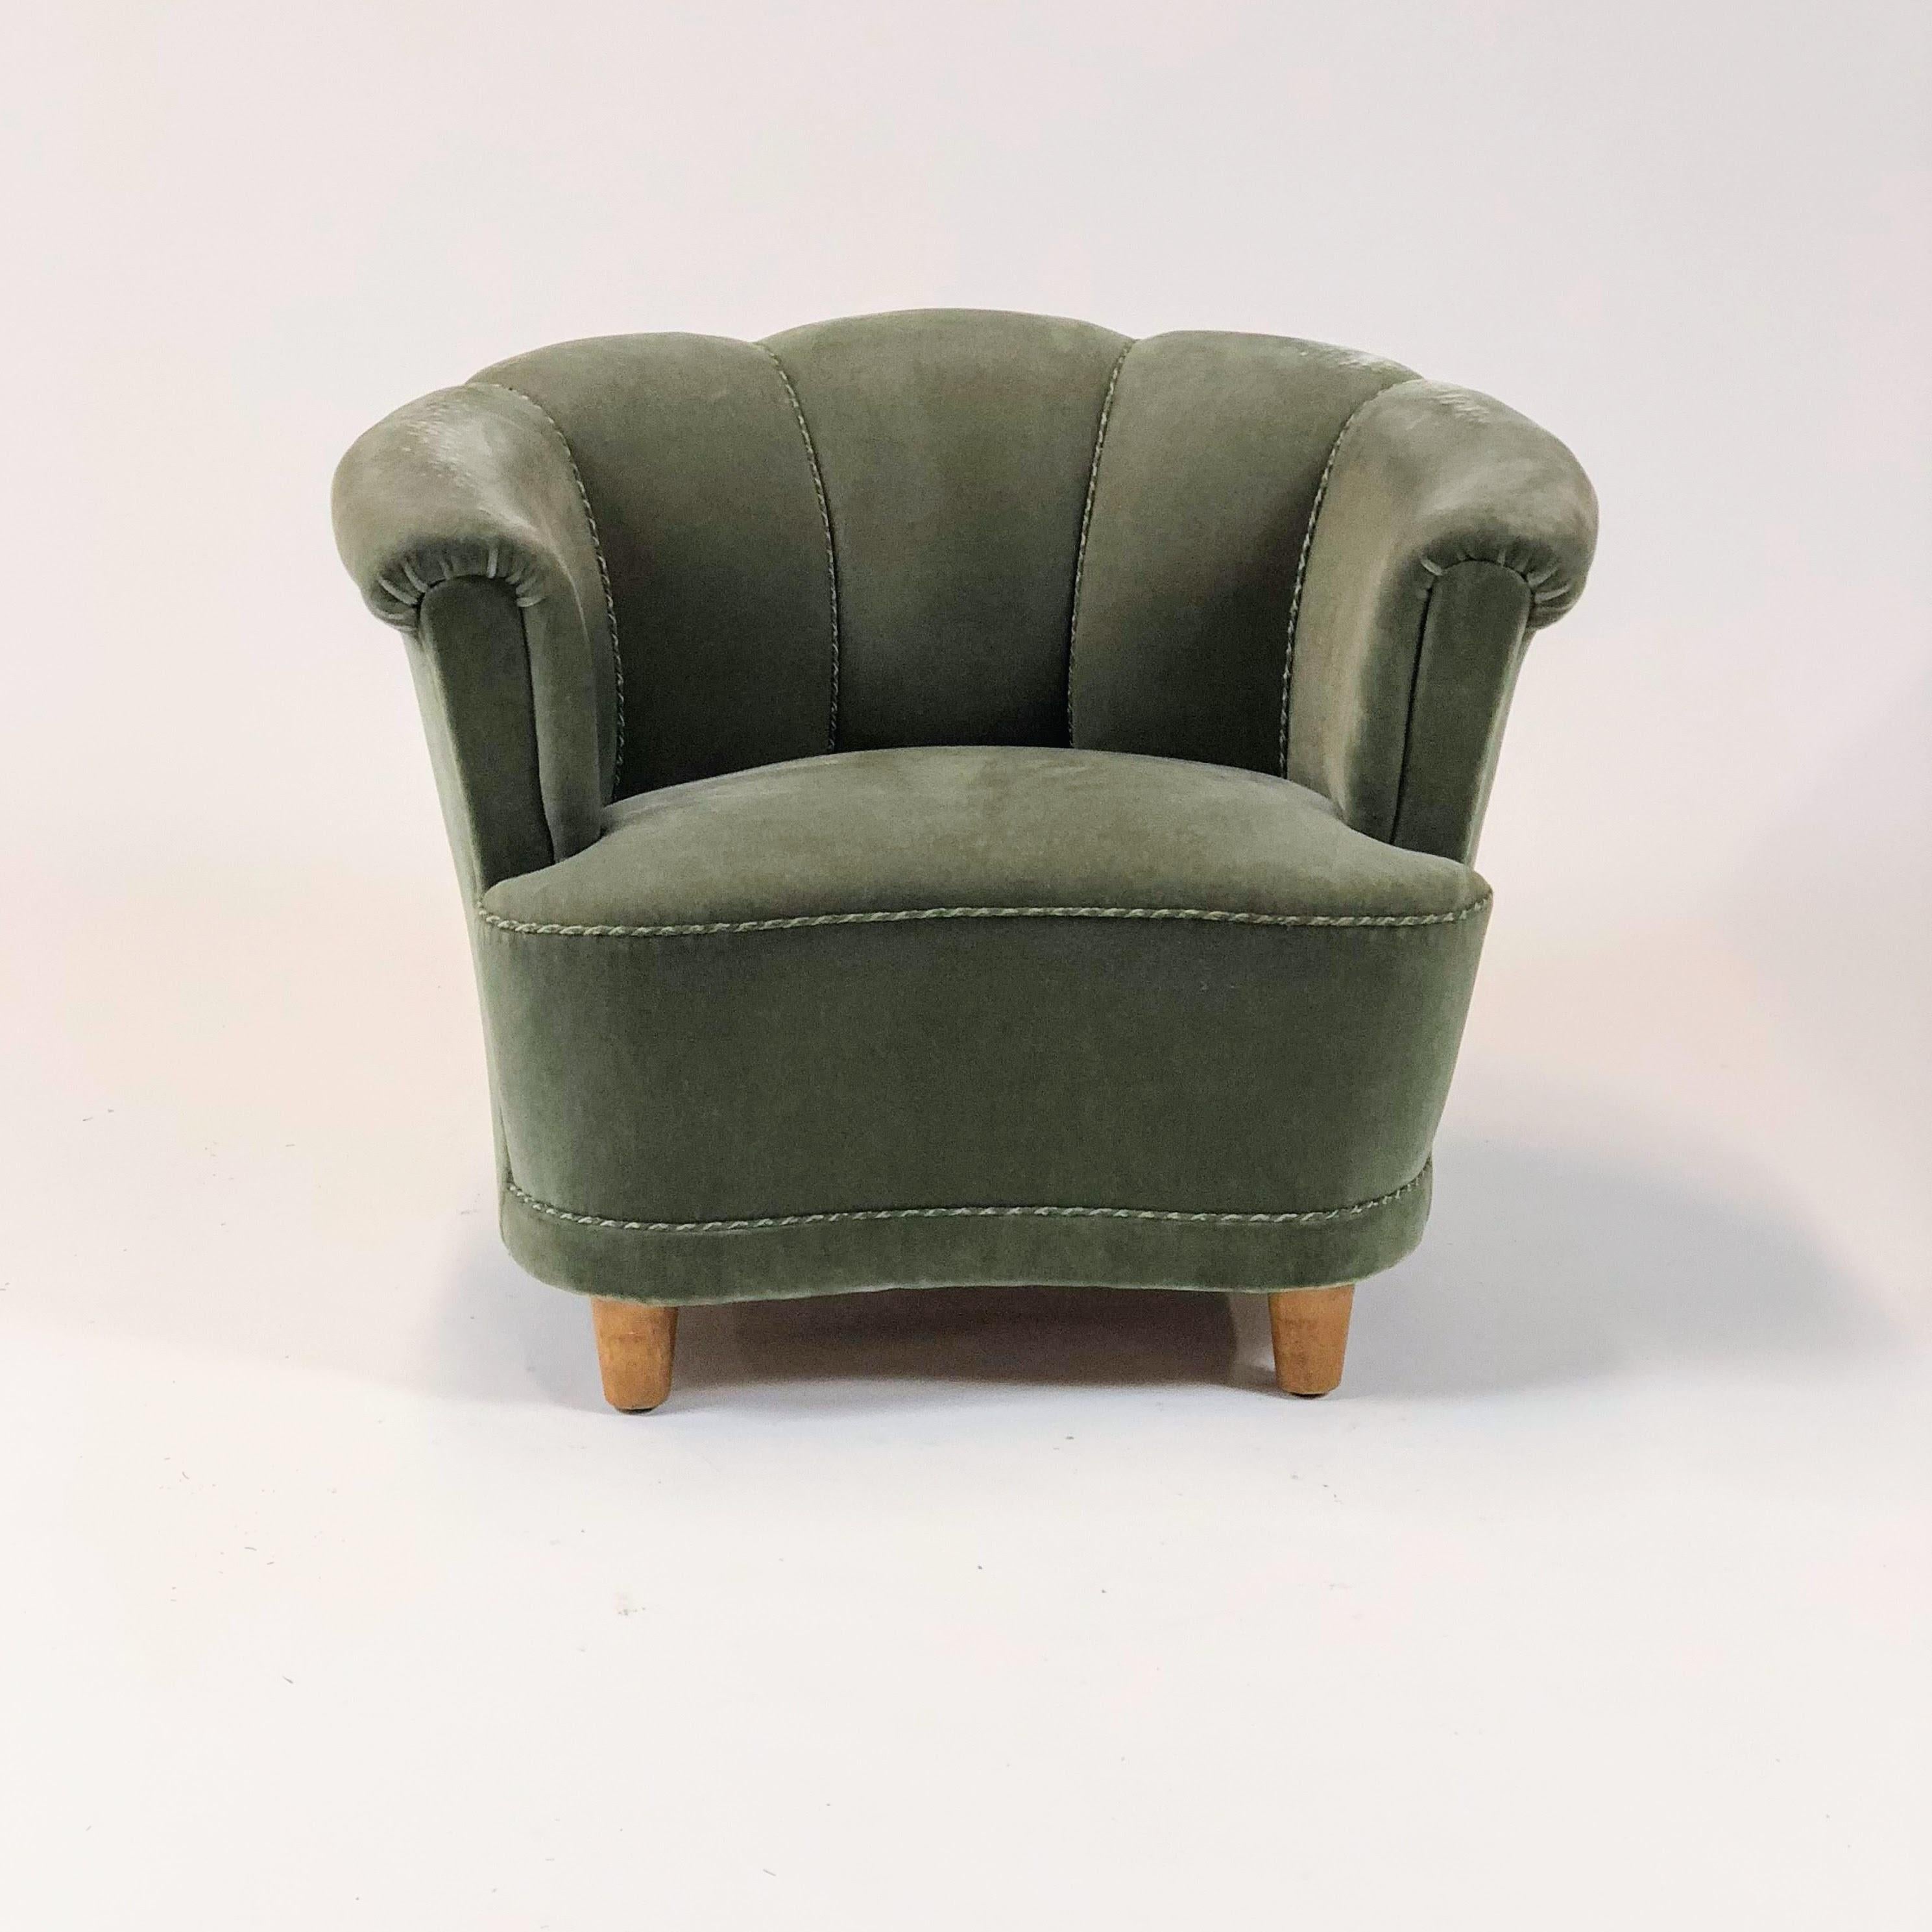 A pair of mid-century Swedish lounge chairs. Upholstered in an interesting green gray velour with scalloped back, piping detail on outer edges, and beech feet.